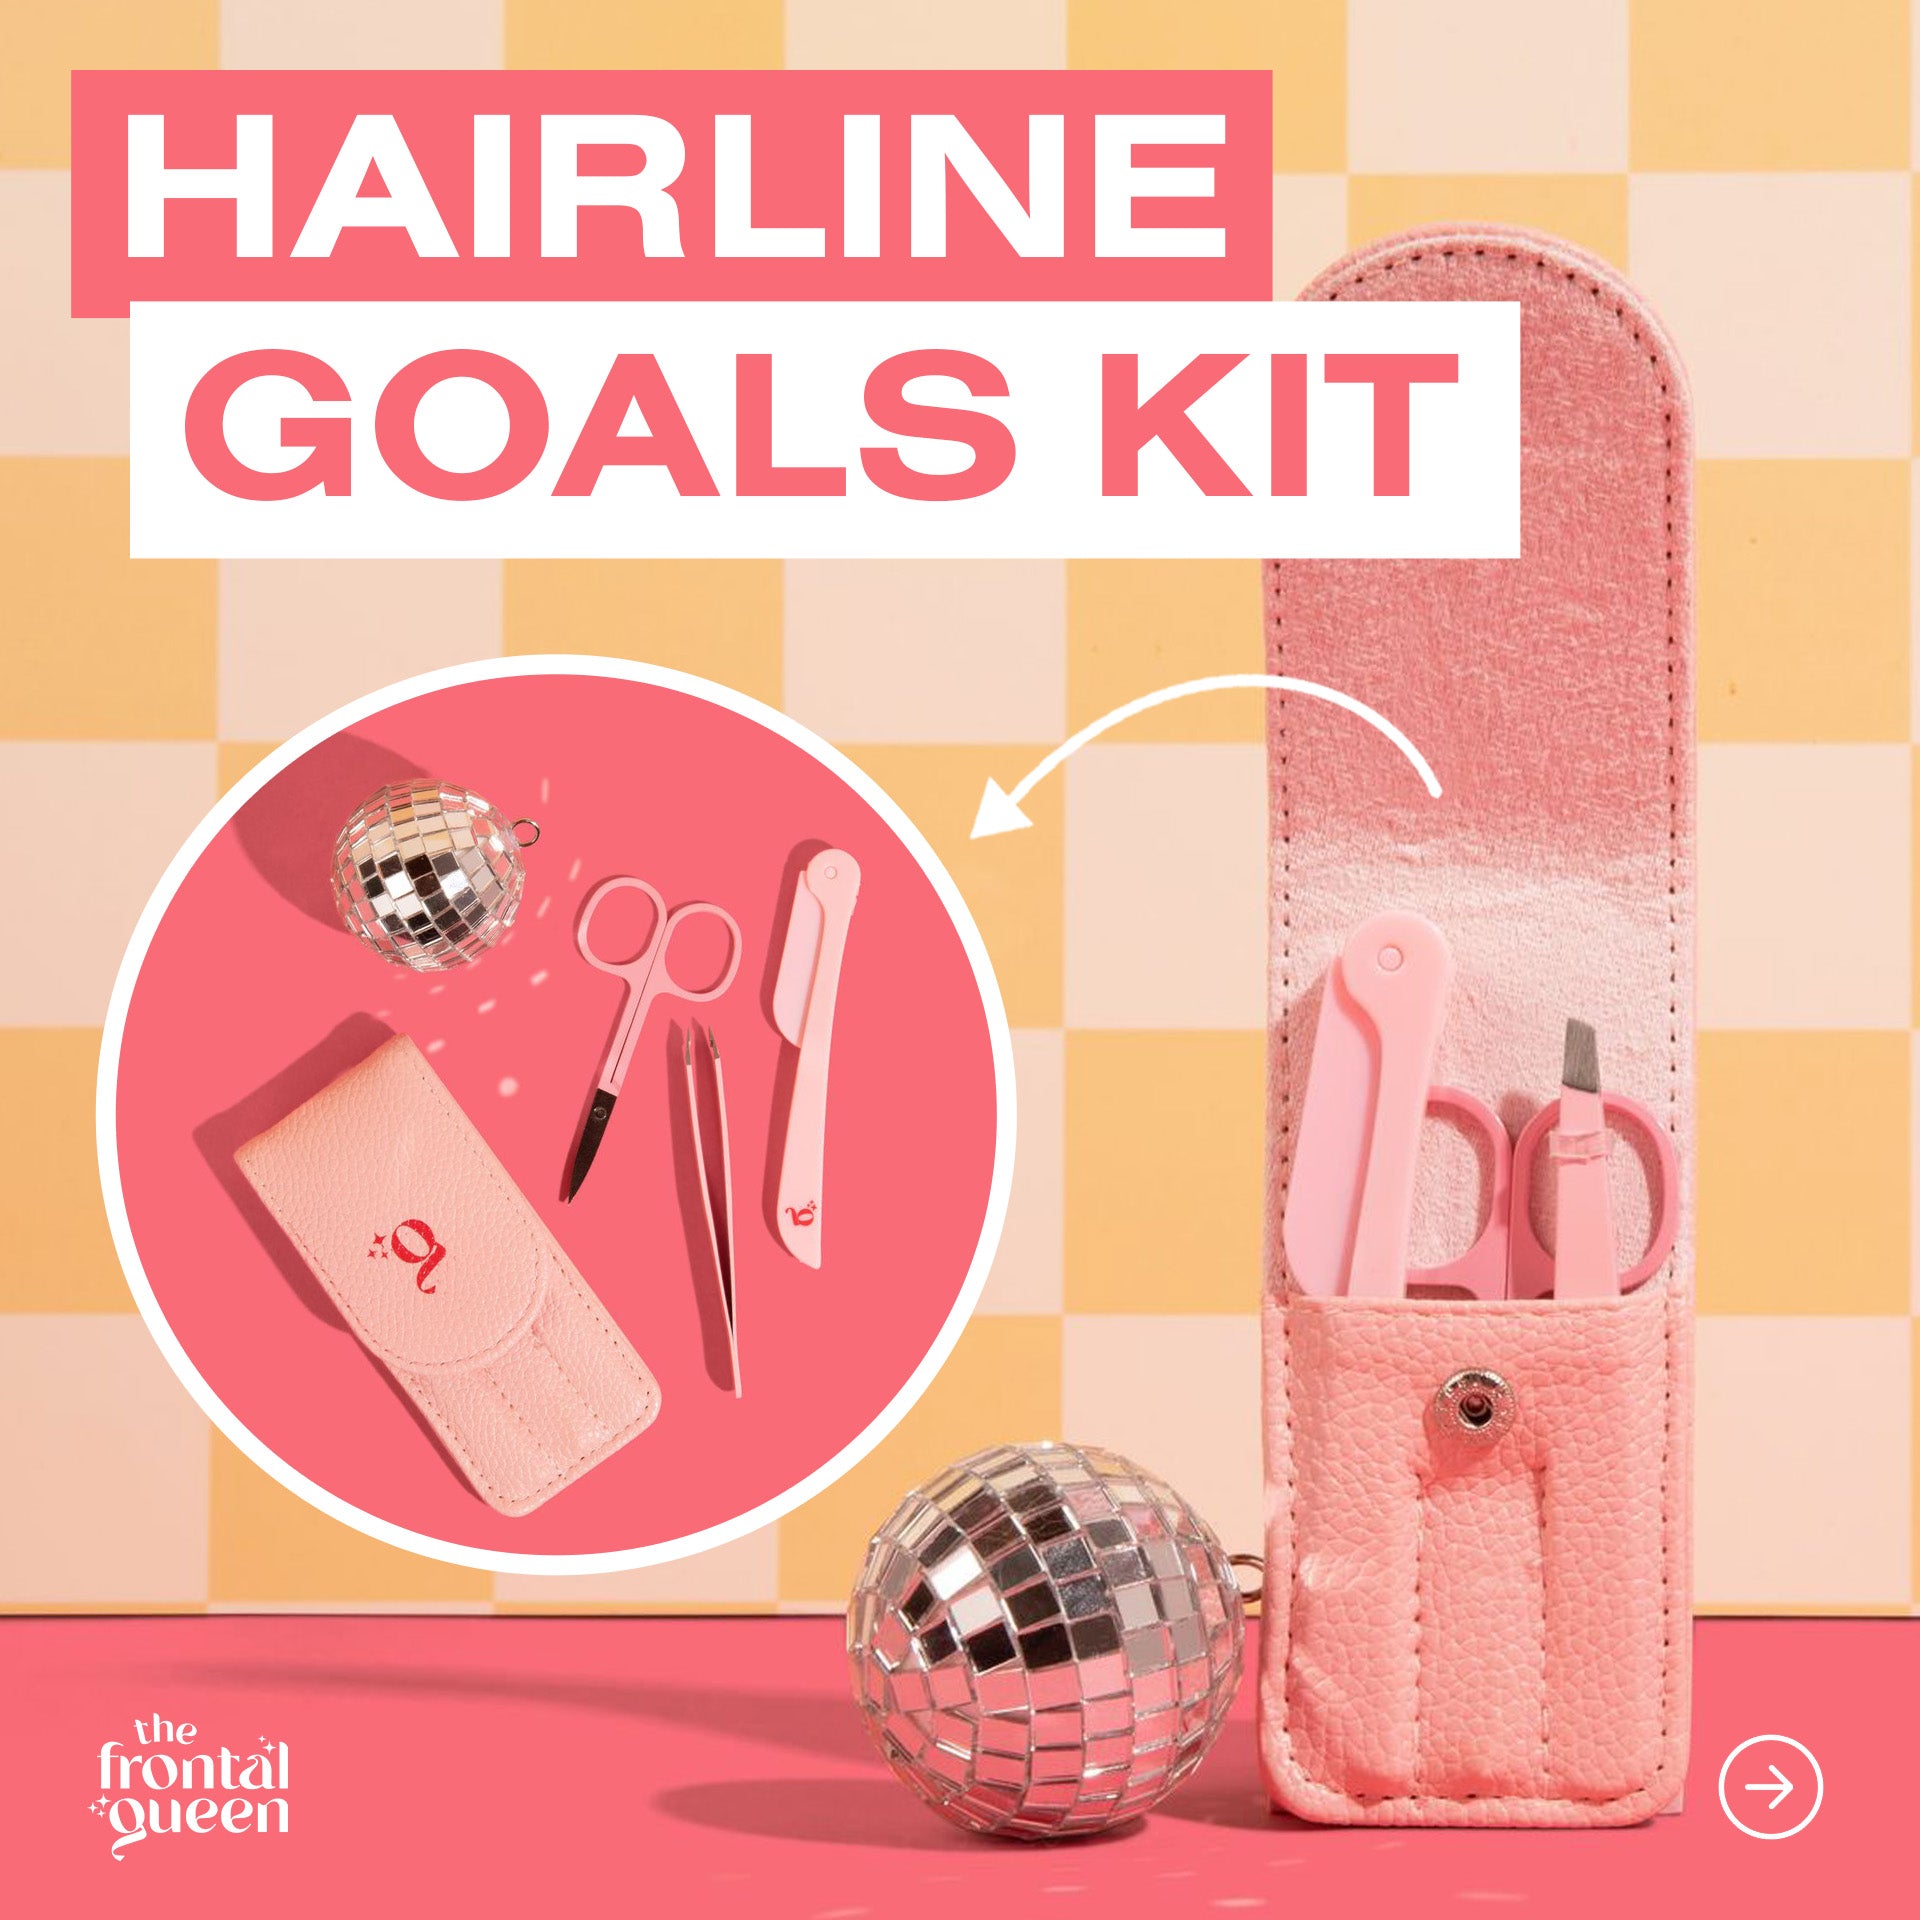 Hairline Goals Kit - The Frontal Queen